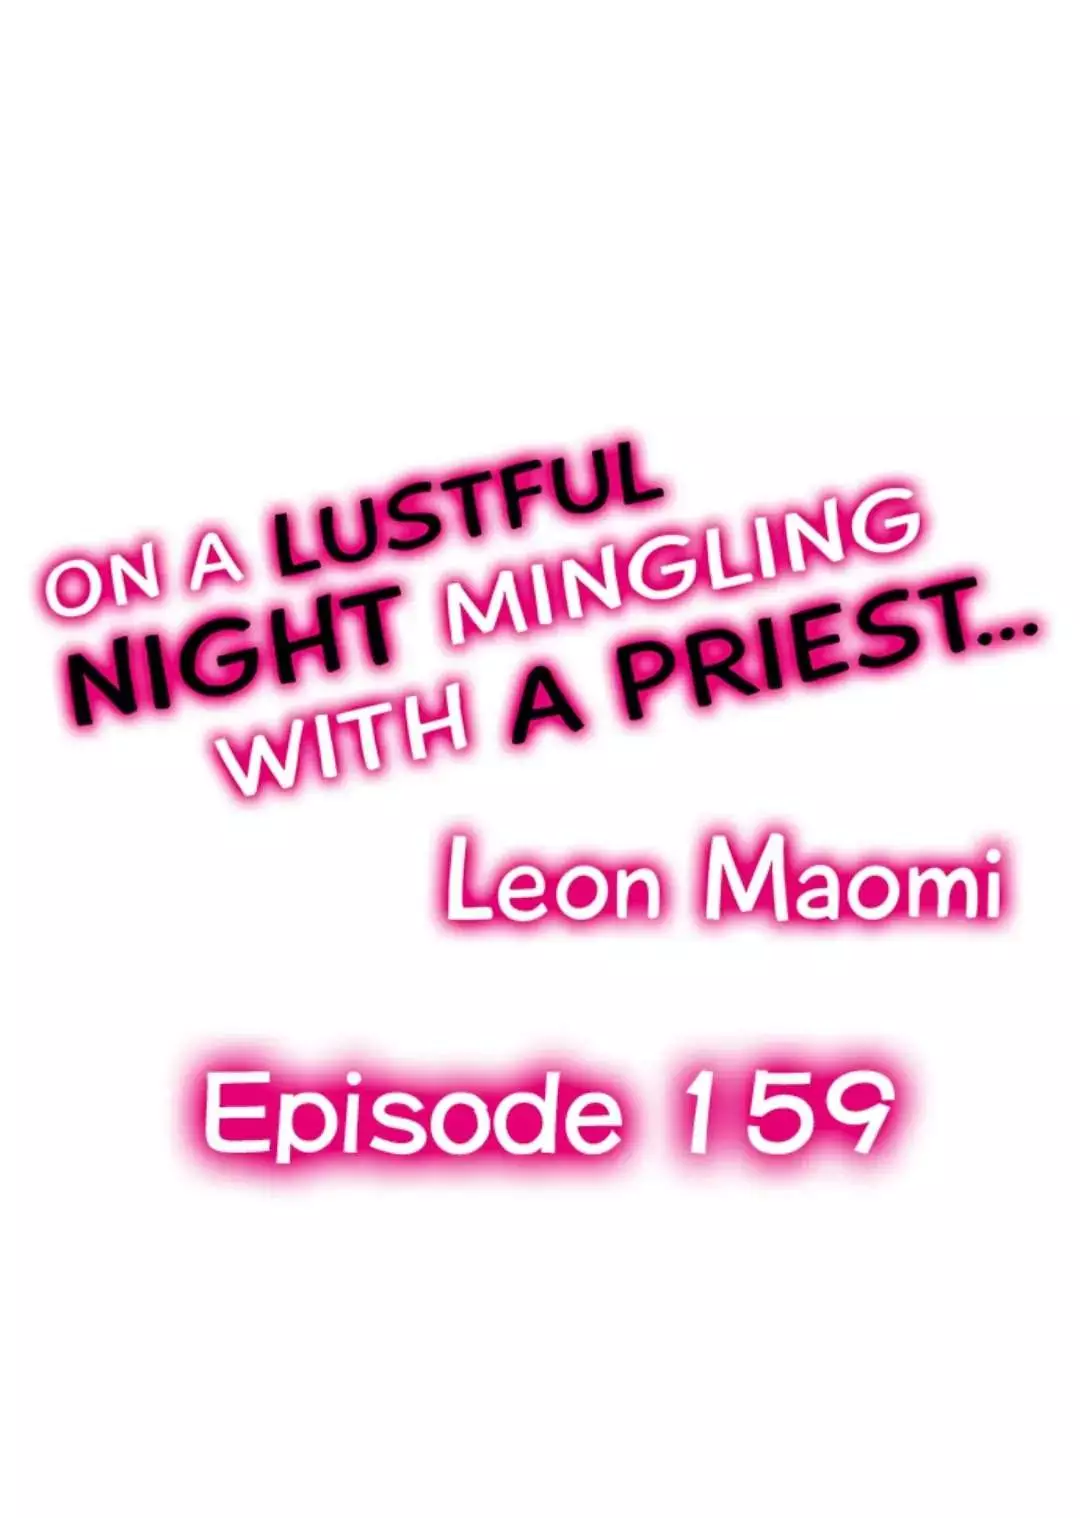 On A Lustful Night Mingling With A Priest - 159 page 1-7f74d6b2